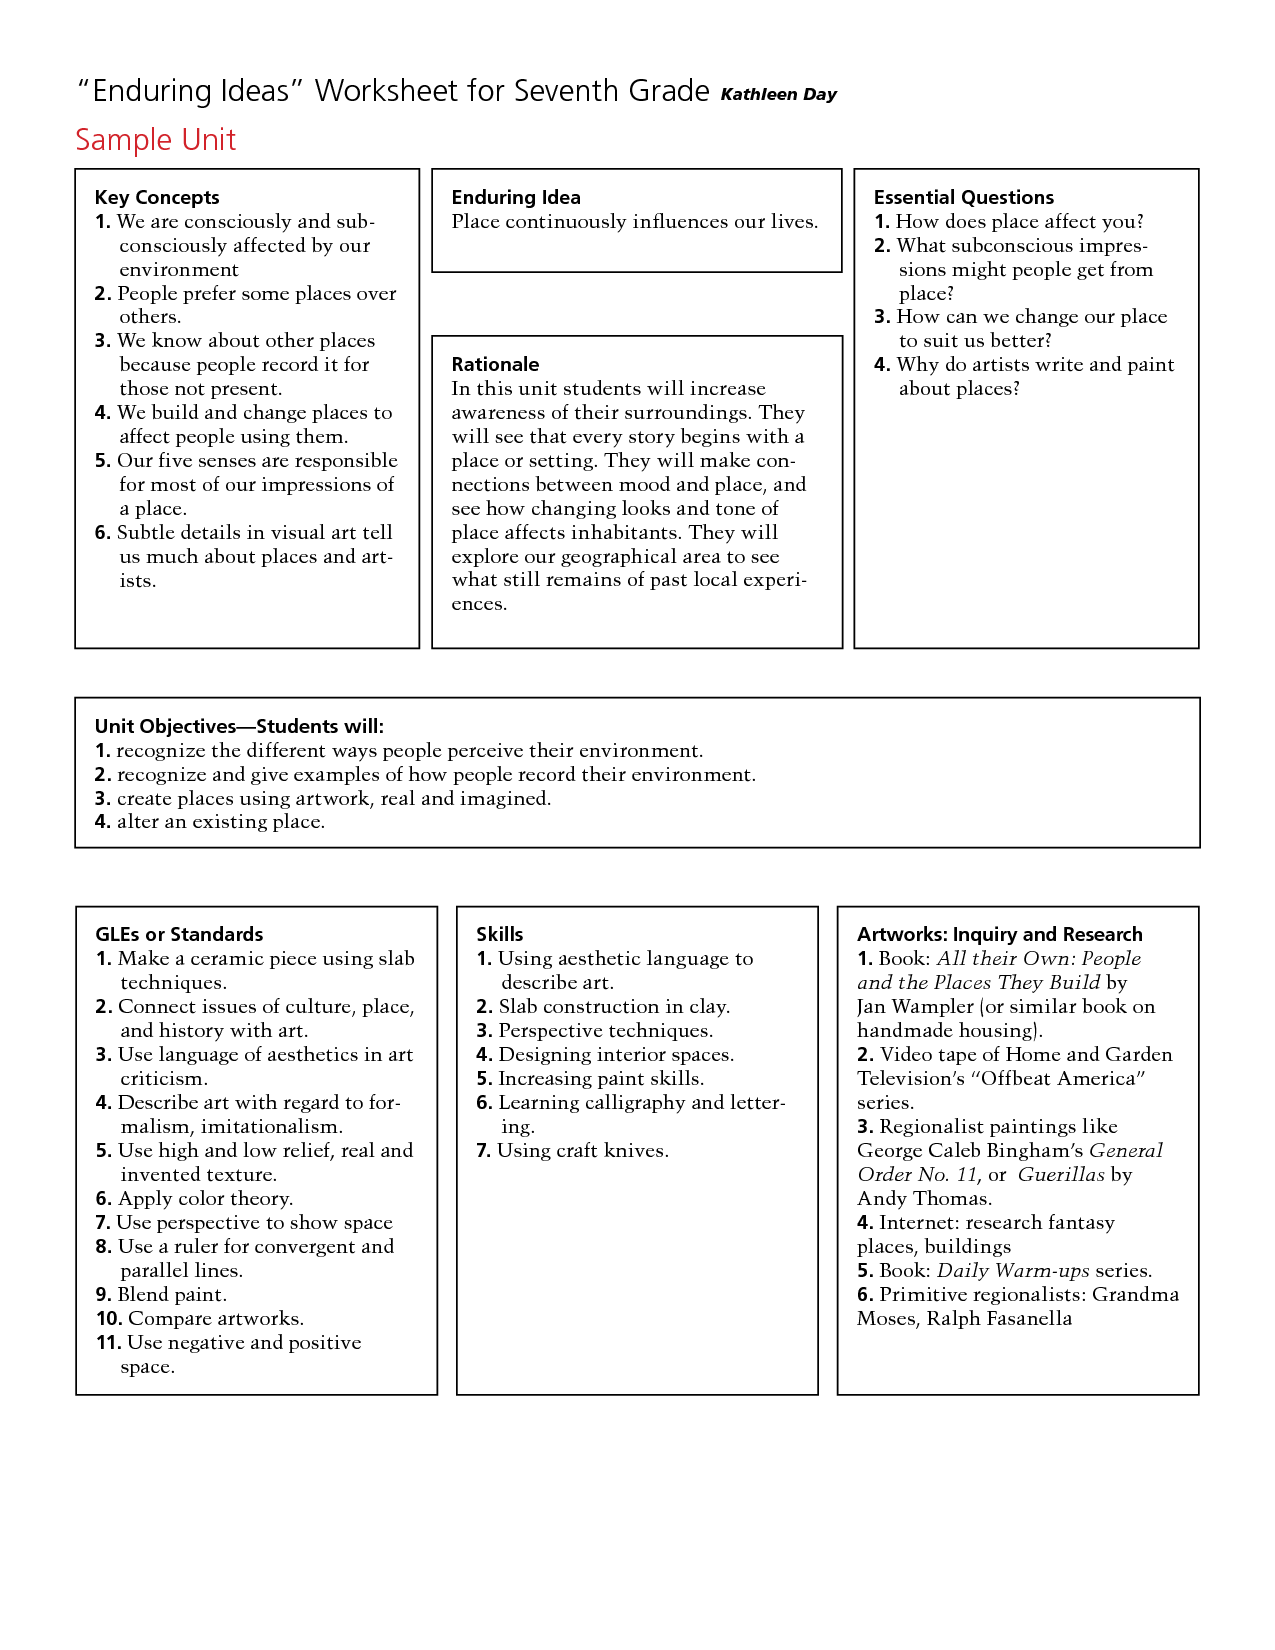 16 Best Images of Get To Know Students Worksheet - All ...